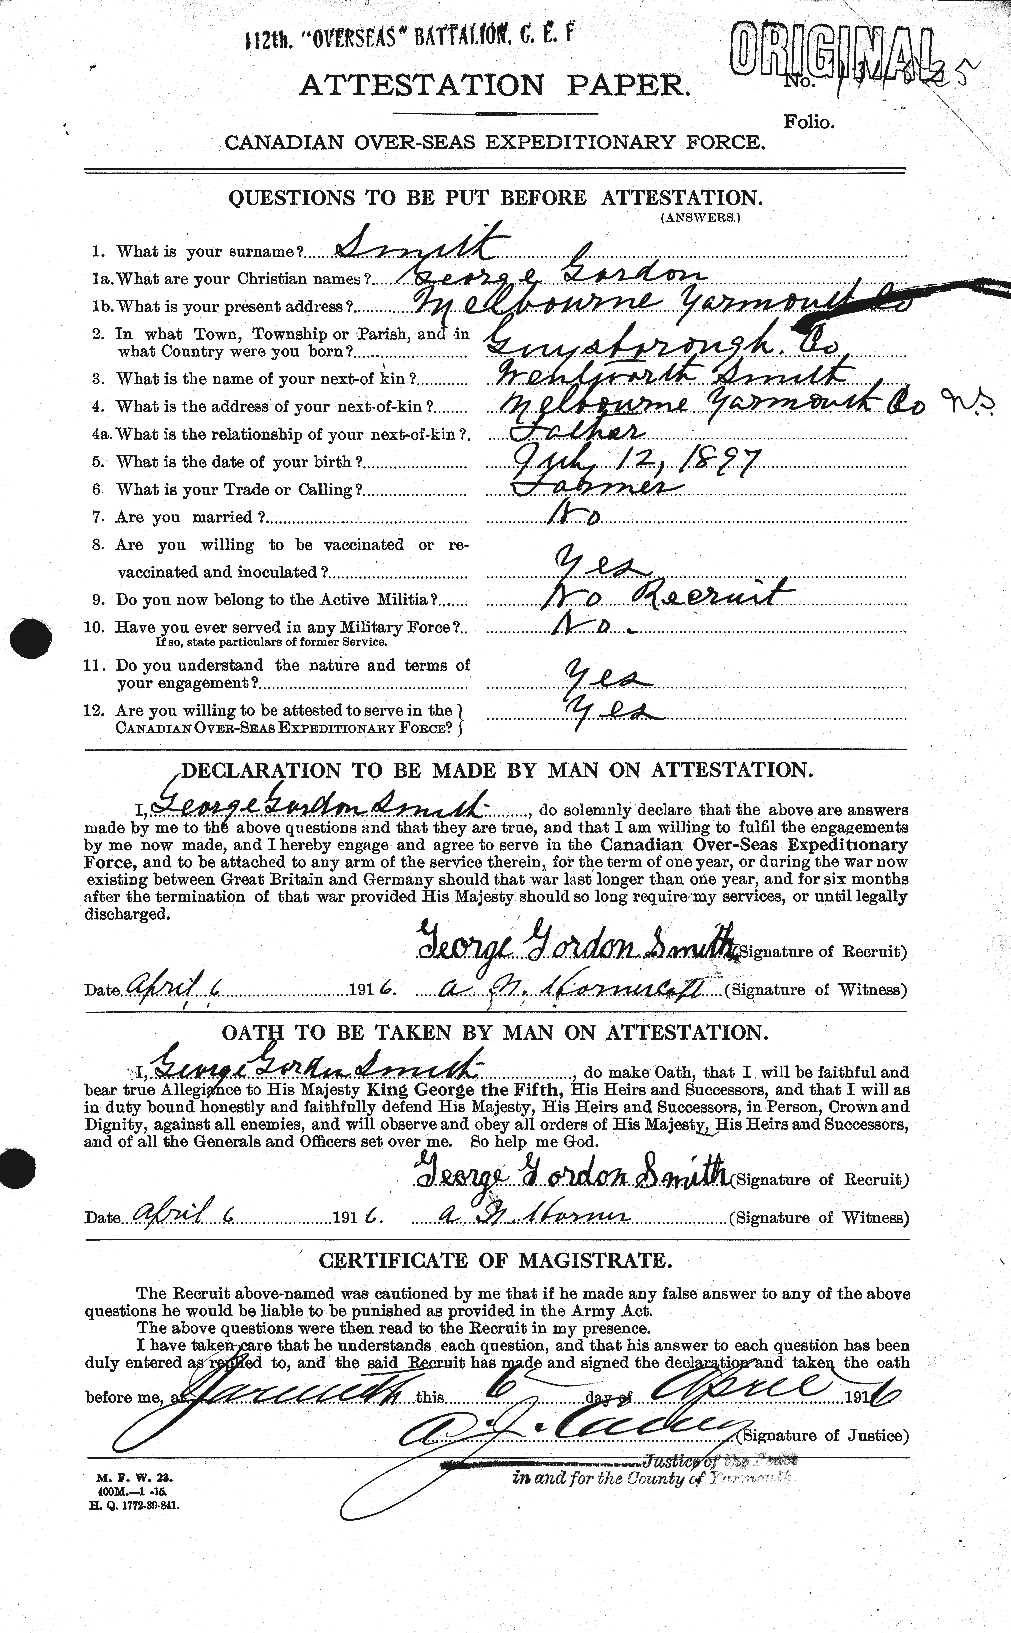 Personnel Records of the First World War - CEF 102363a